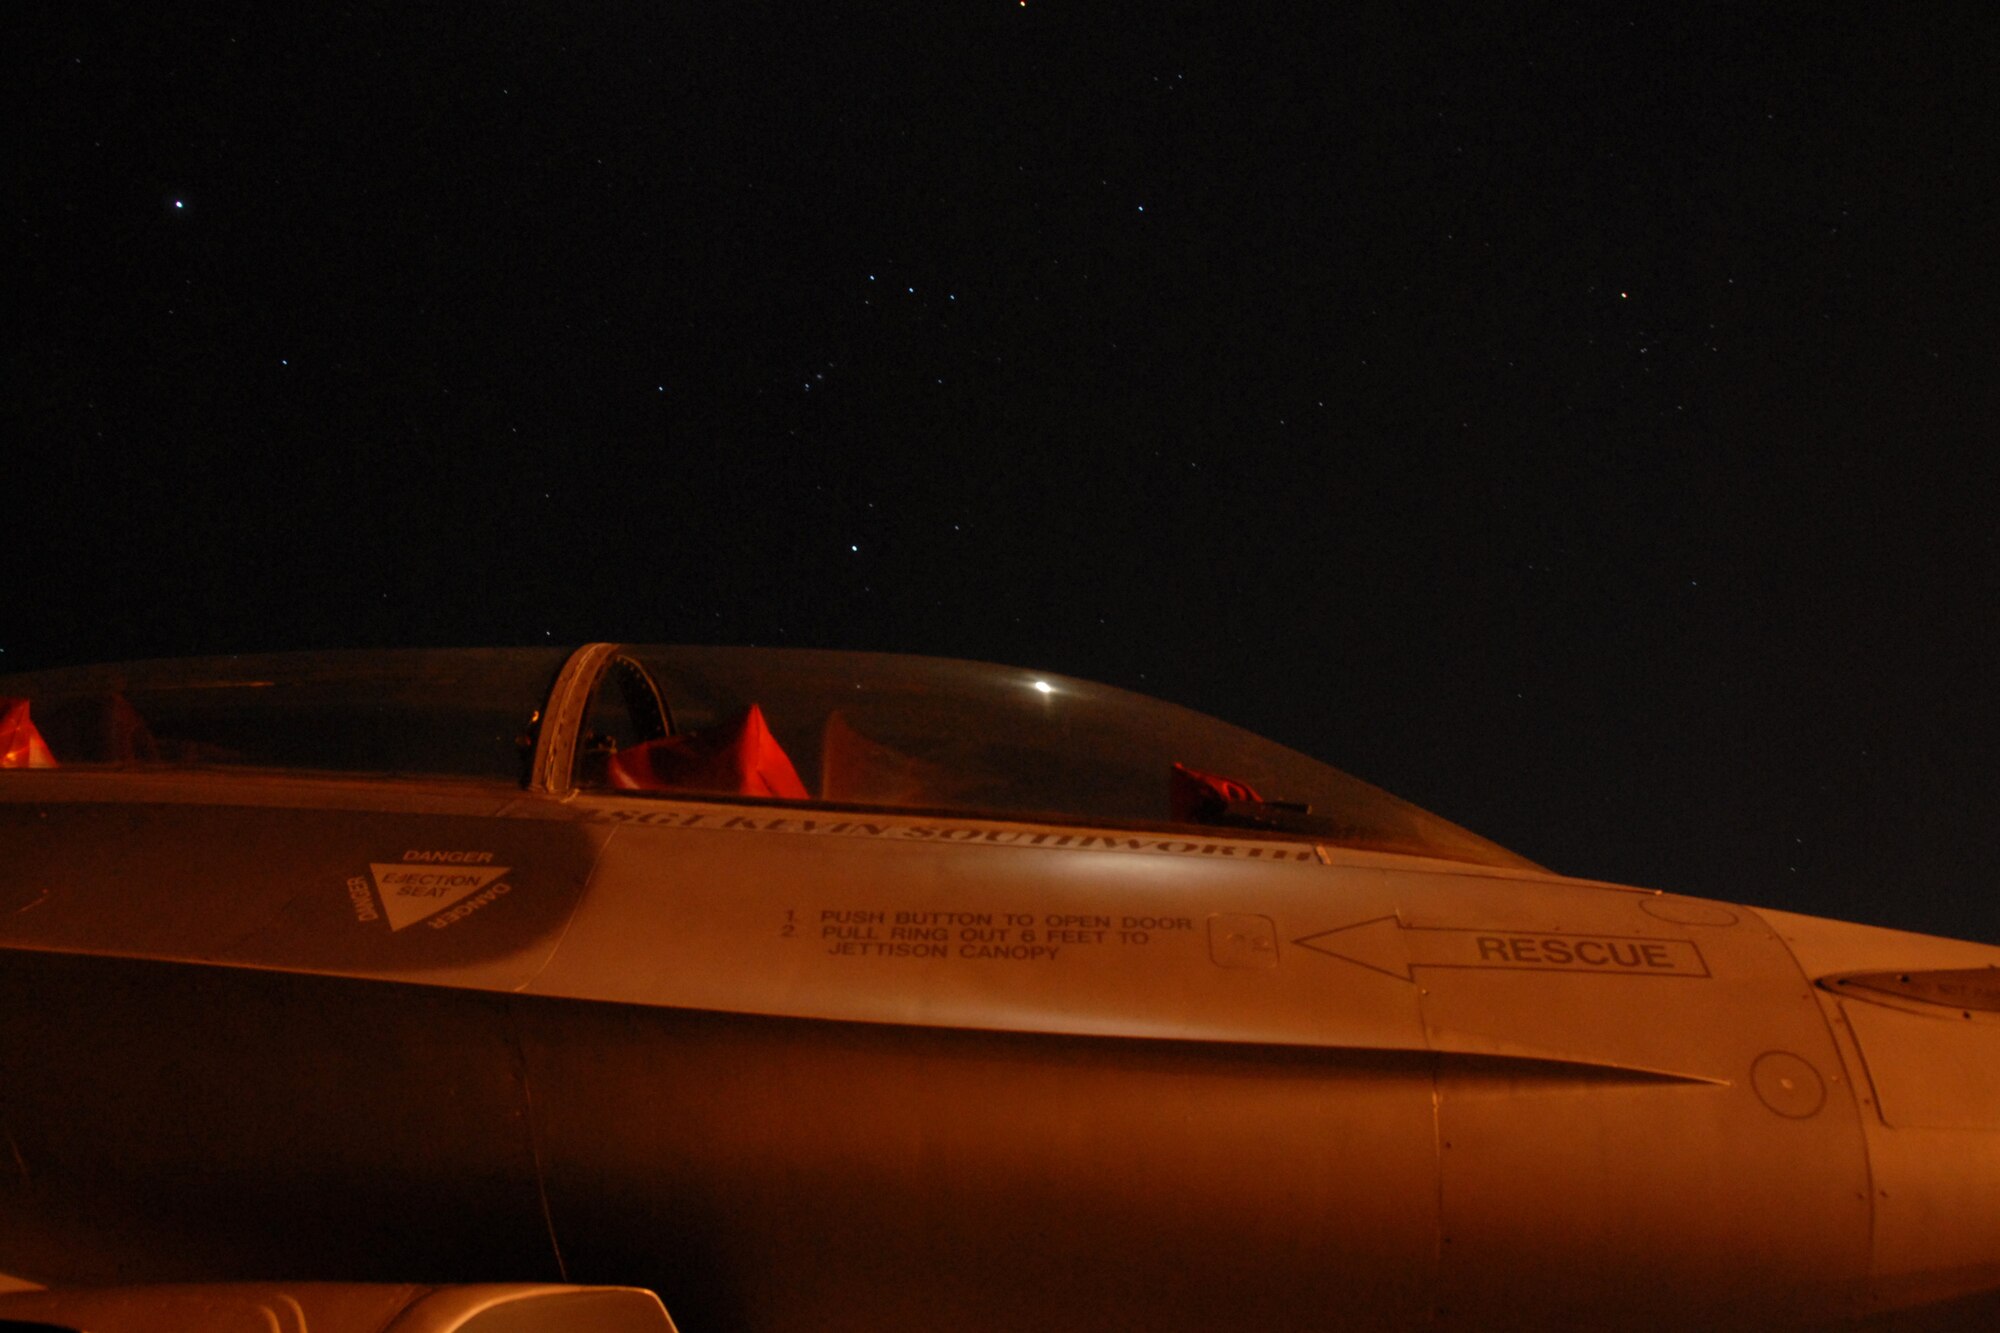 One of eight F-16C Fighting Falcon from the Air National Guard’s 115th  Fighter Wing in Madison, Wis., rests below a star filled sky March 23, 2010, at Naval Air Station Key West., Fla.  Close to 145 Airmen of the 115th Fighter Wing in Madison, Wis., spent approximately two weeks at Naval Air Station, Key West, gaining valuable training as their F-16 Falcons sparred against Navy F-18 Super Hornets and F-5 Tigers here.  (U.S. Air Force photo by Airman 1st Class Ryan Roth, 115 FW/PA)